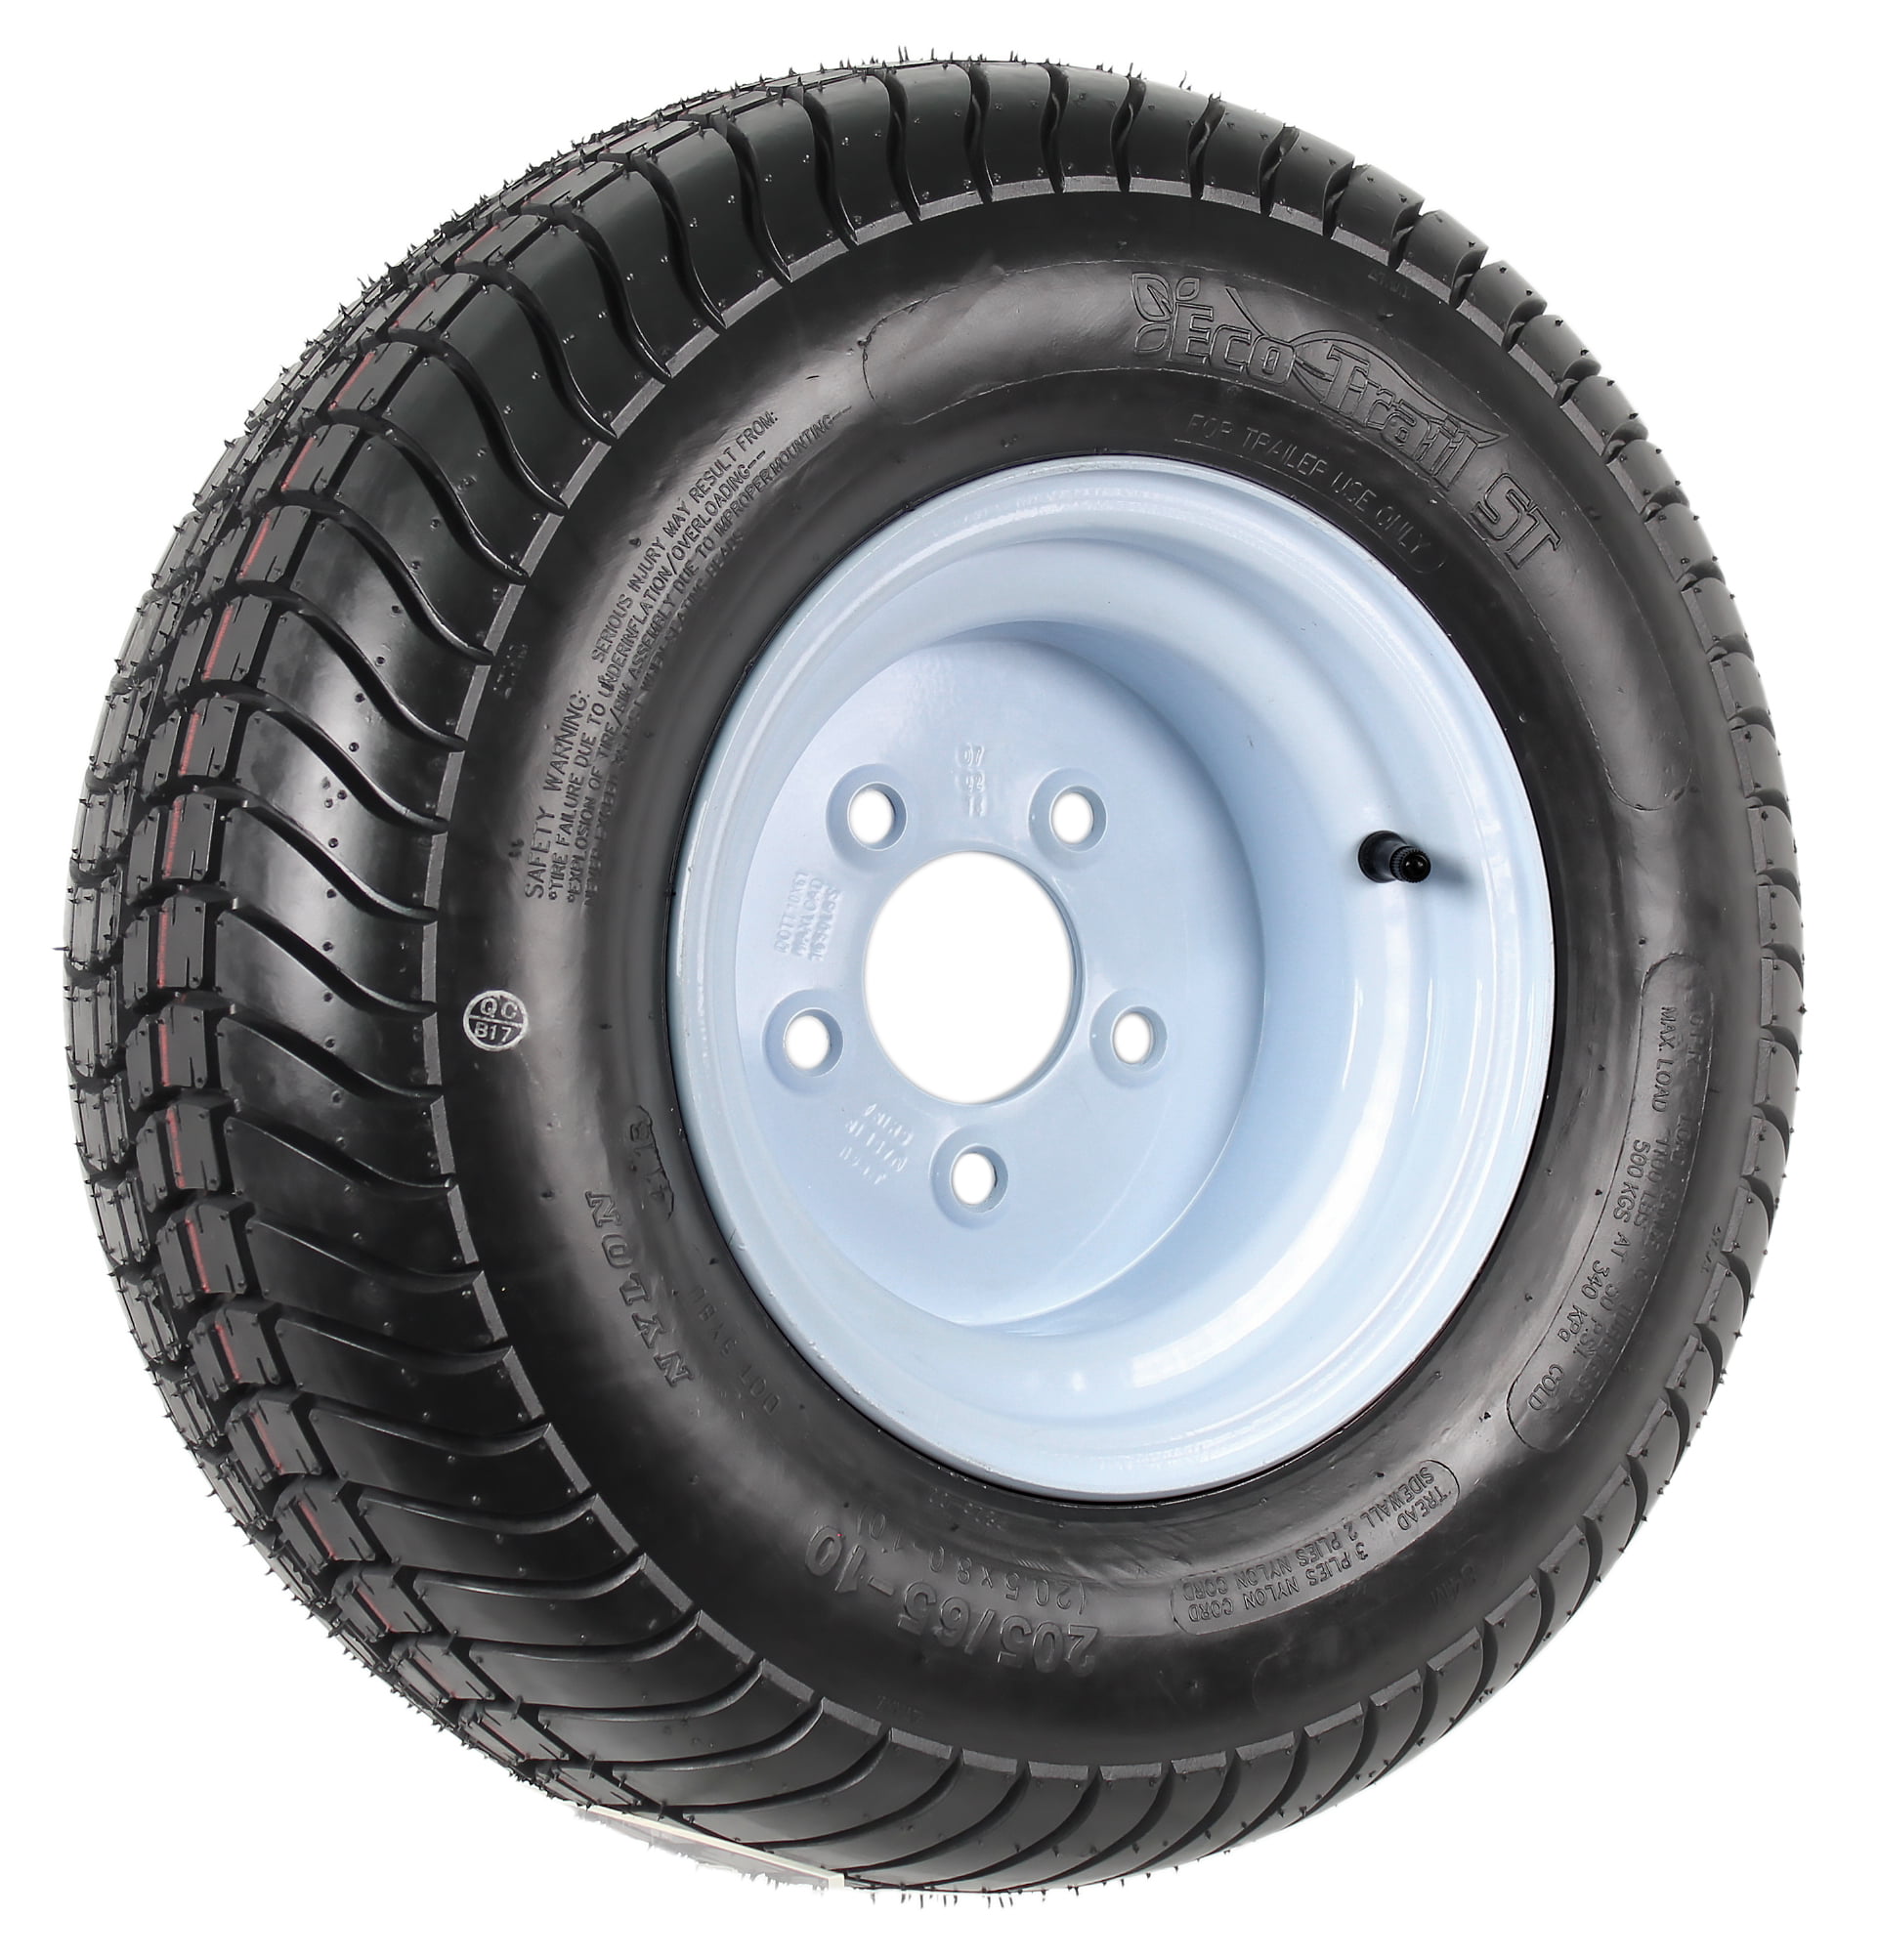 10" Trailer Wheel & Tyre for Indespension 750kg Goods Trailers 20.5 x 8.0-10 